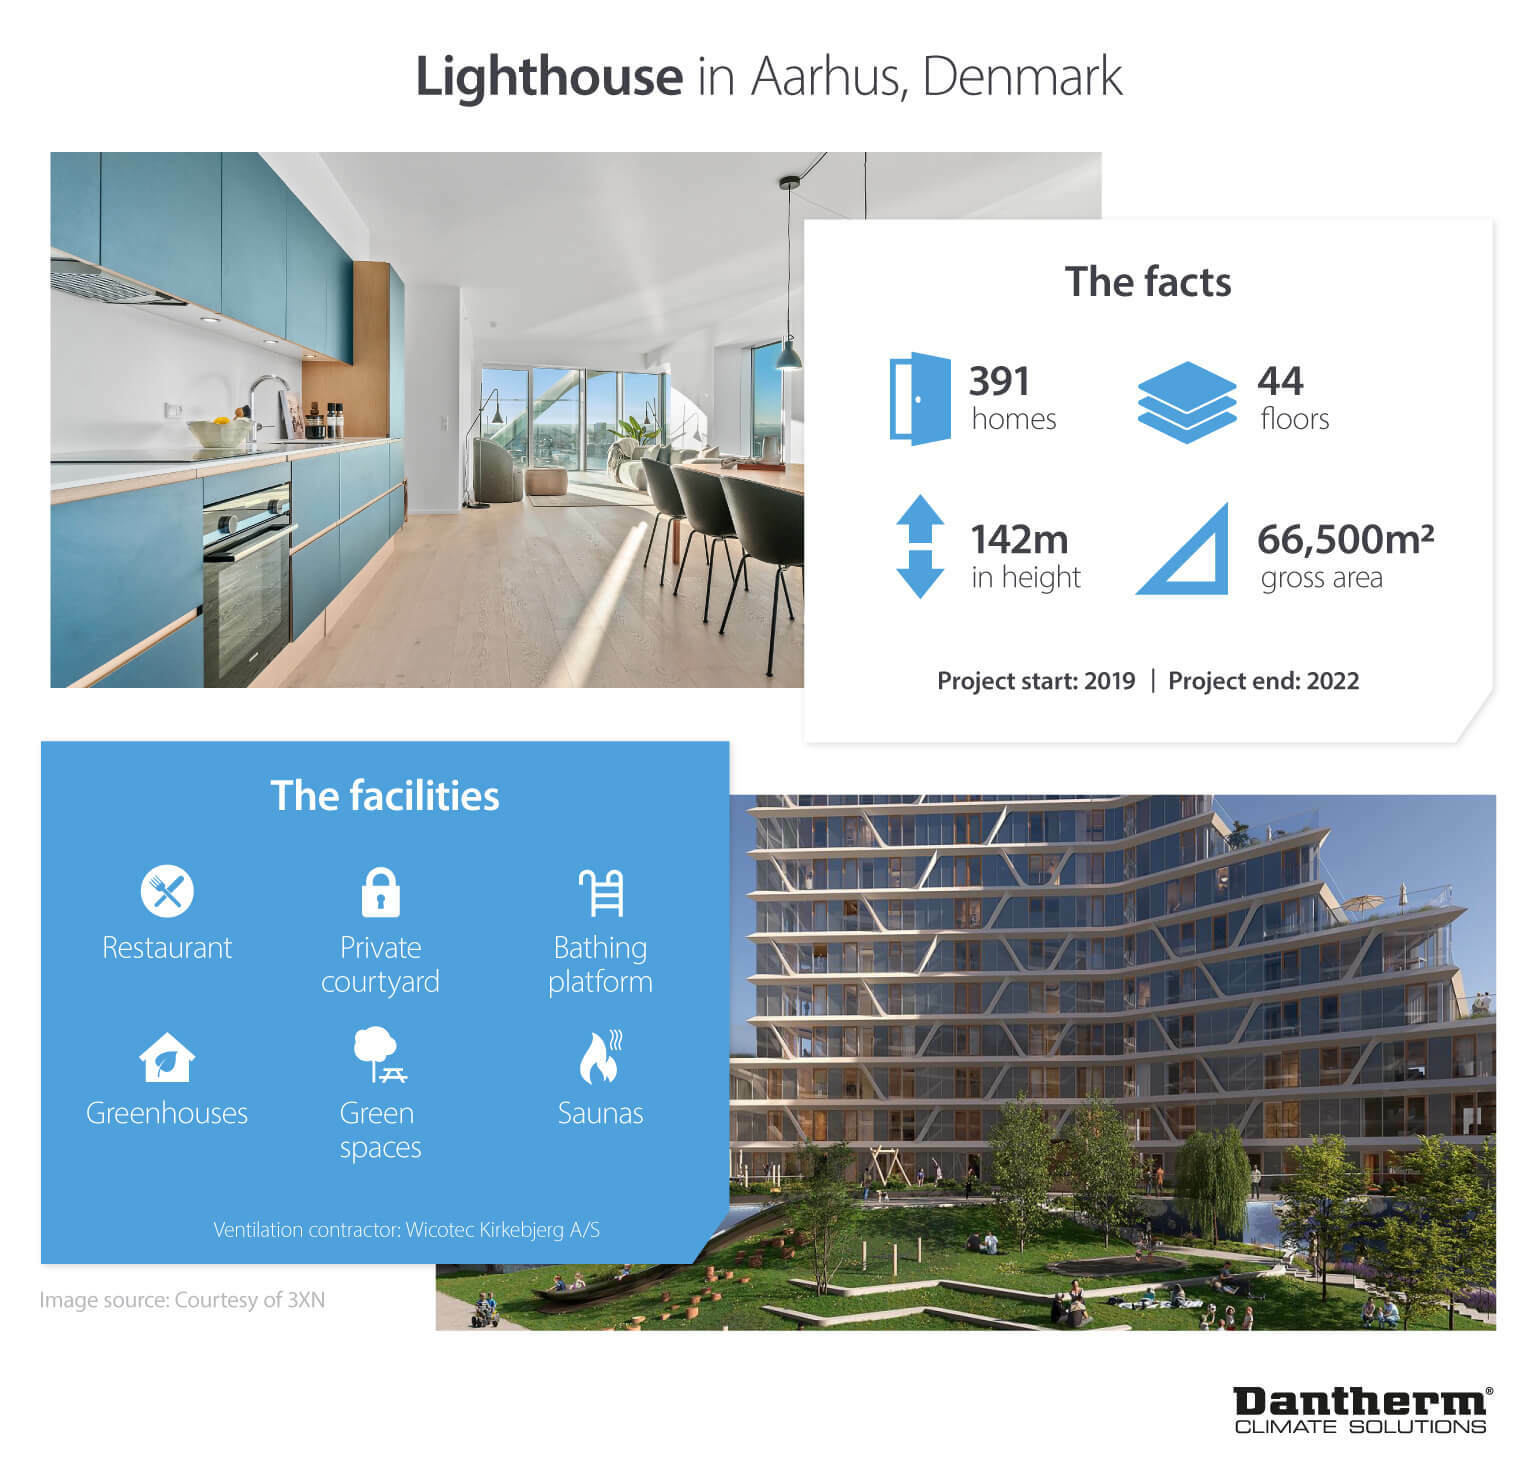 Lighthouse residential project in Aarhus, Denmark. 391 homes. 142m tall. 44 floors - infographic image